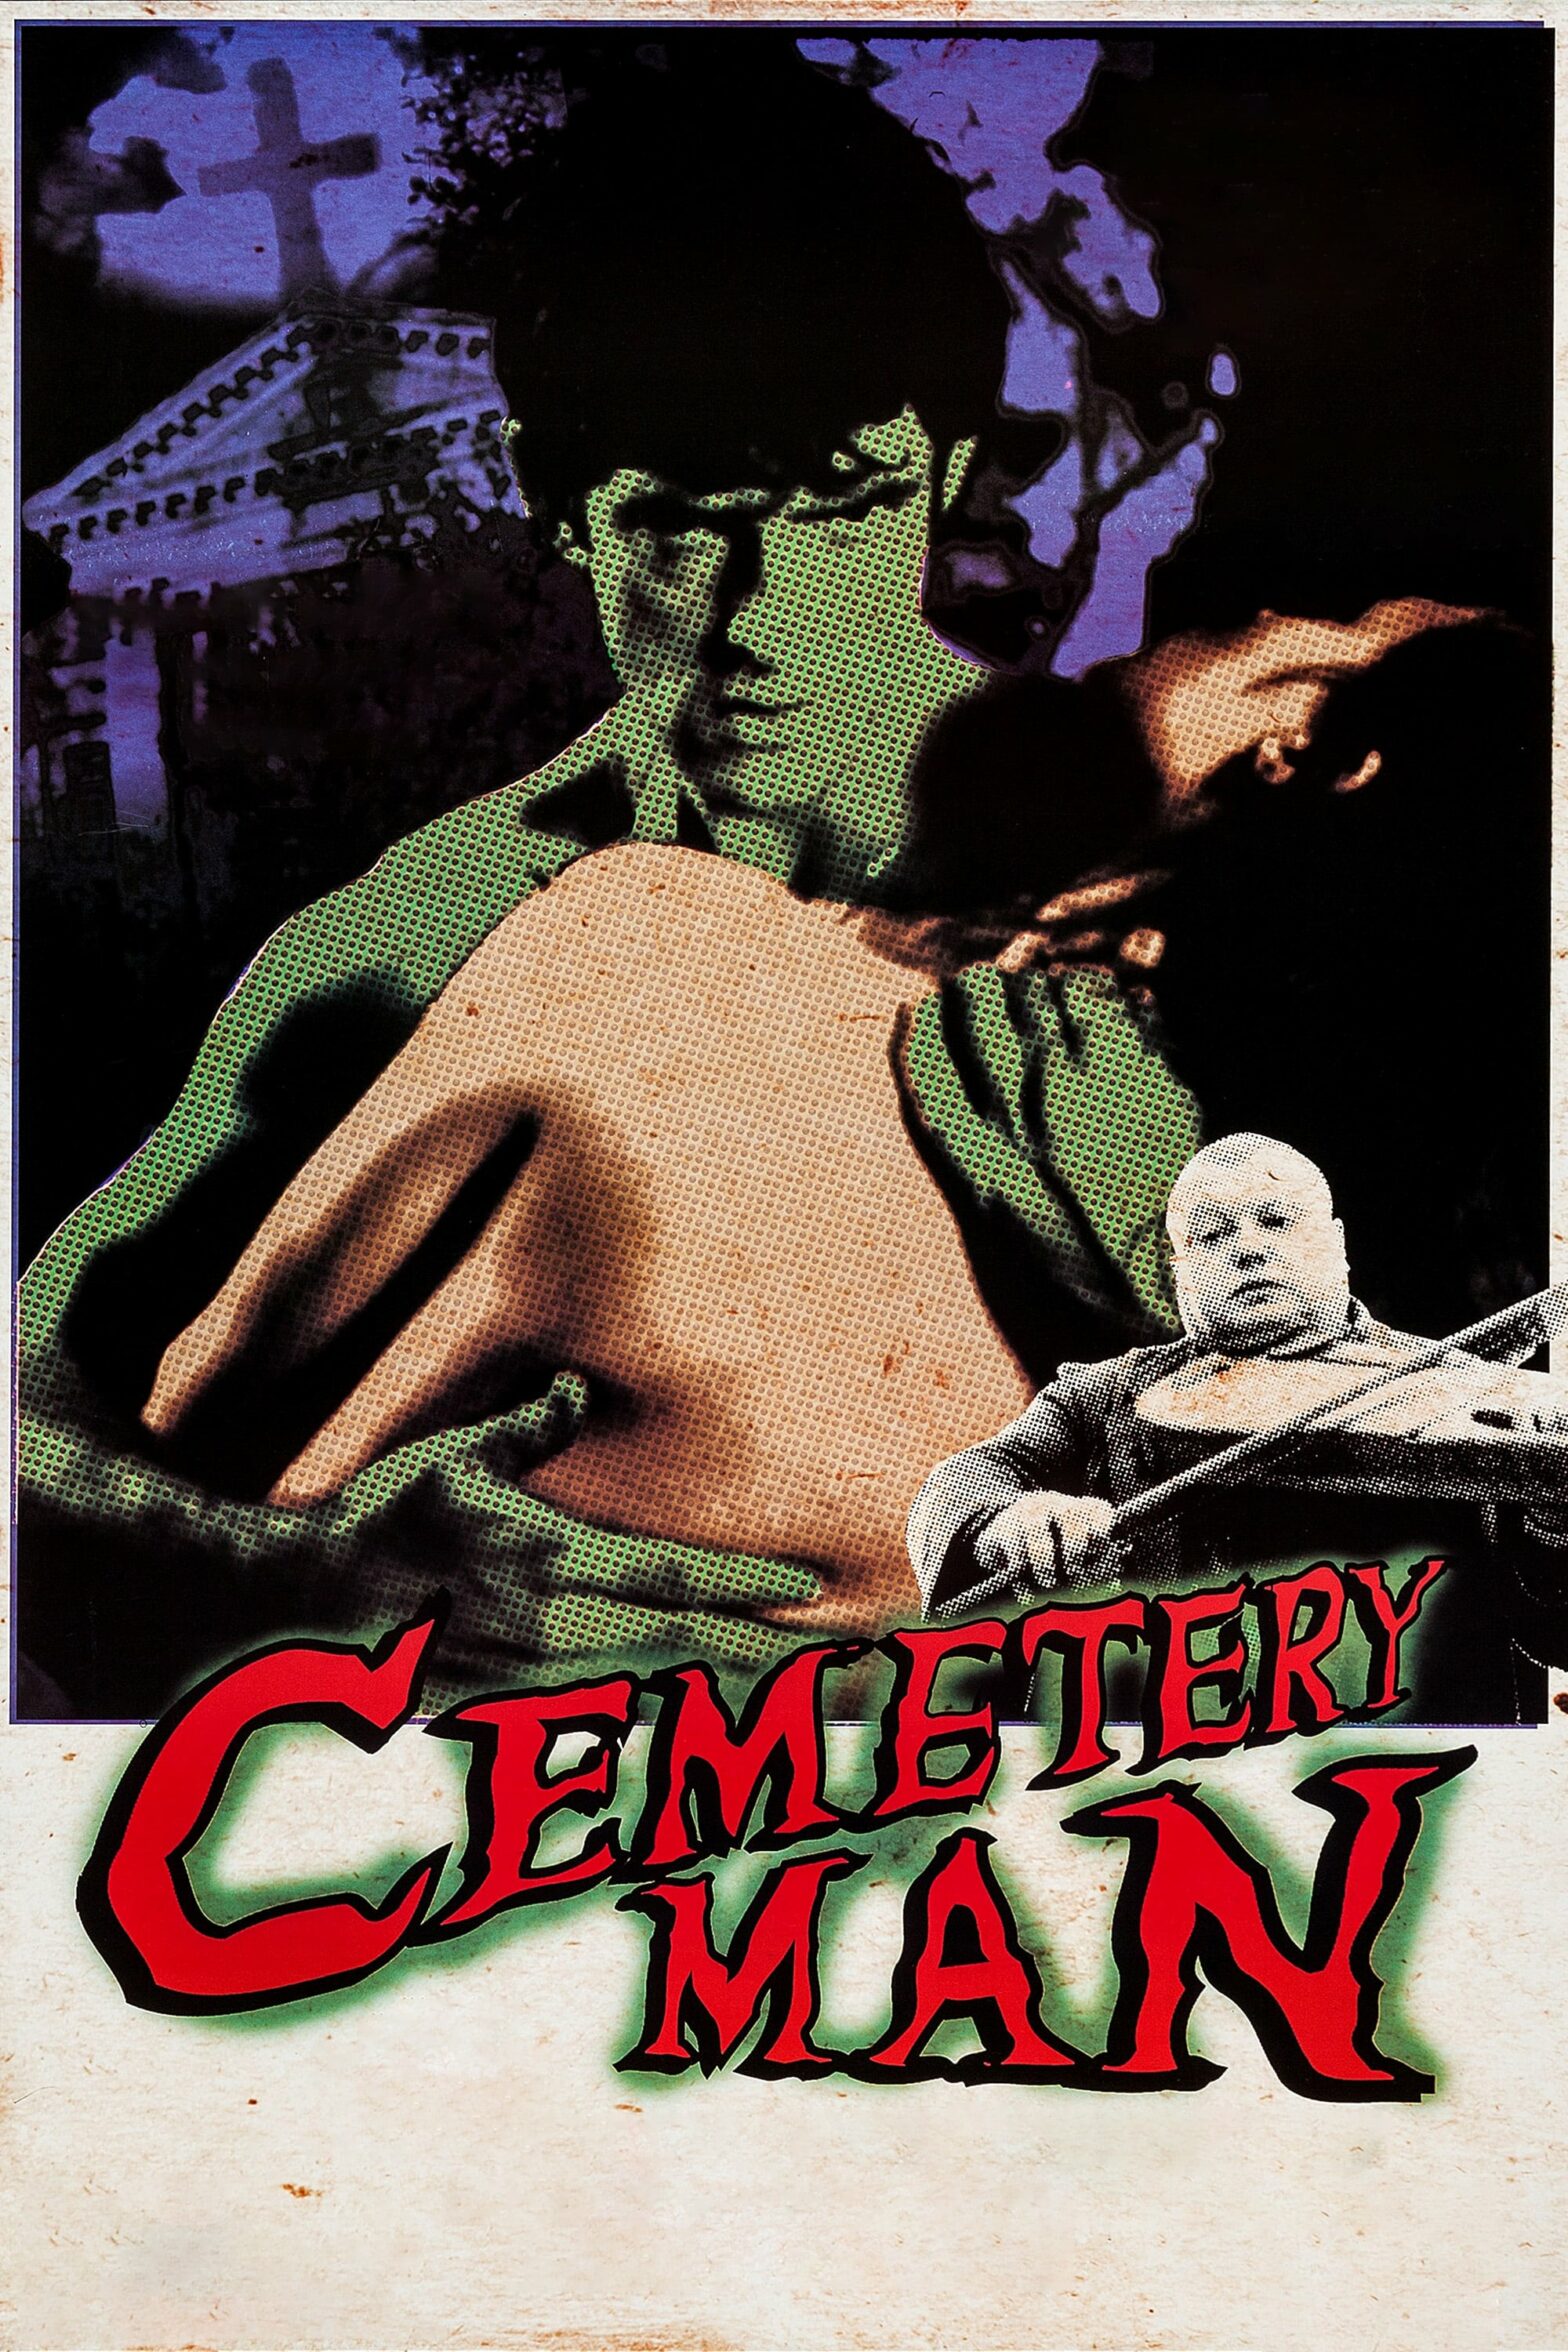 Poster for the movie "Cemetery Man"